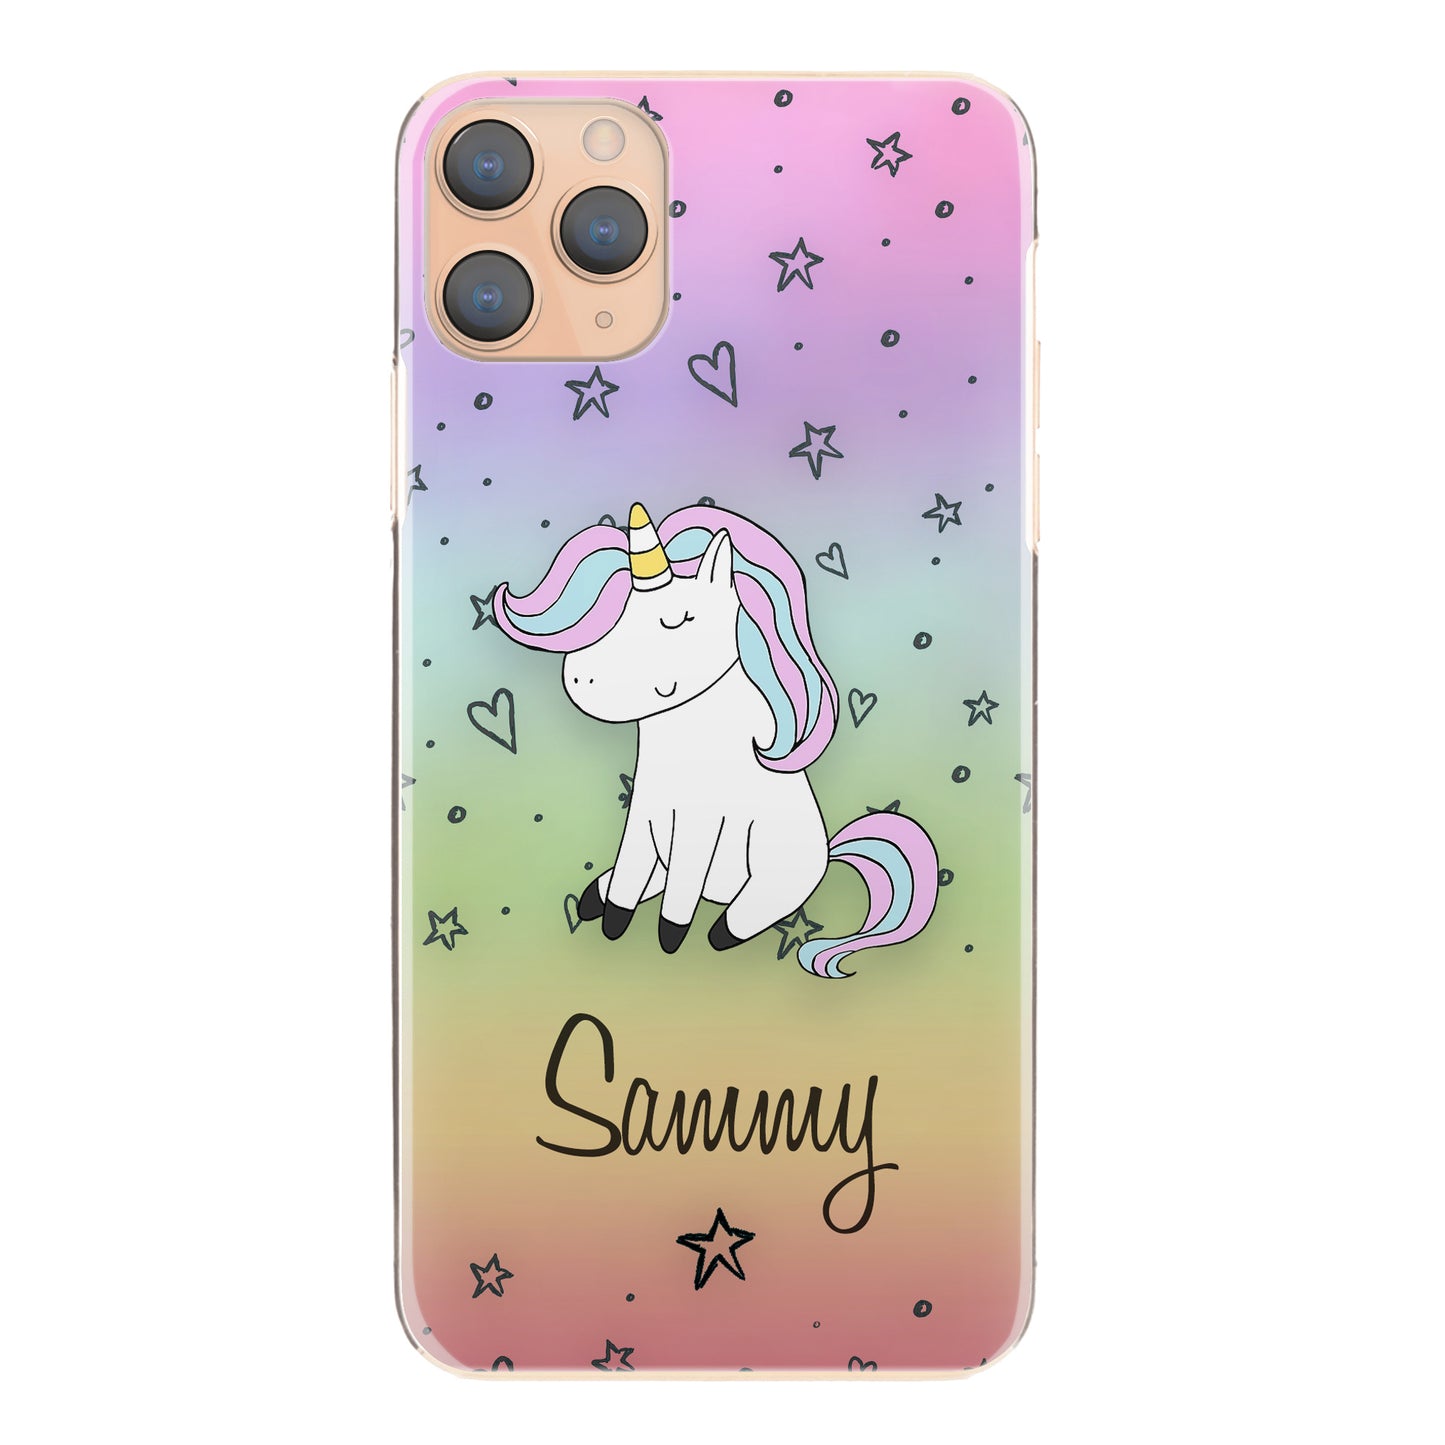 Personalised Nokia Phone Hard Case with Pink and Blue Unicorn on Rainbow Stars and Hearts